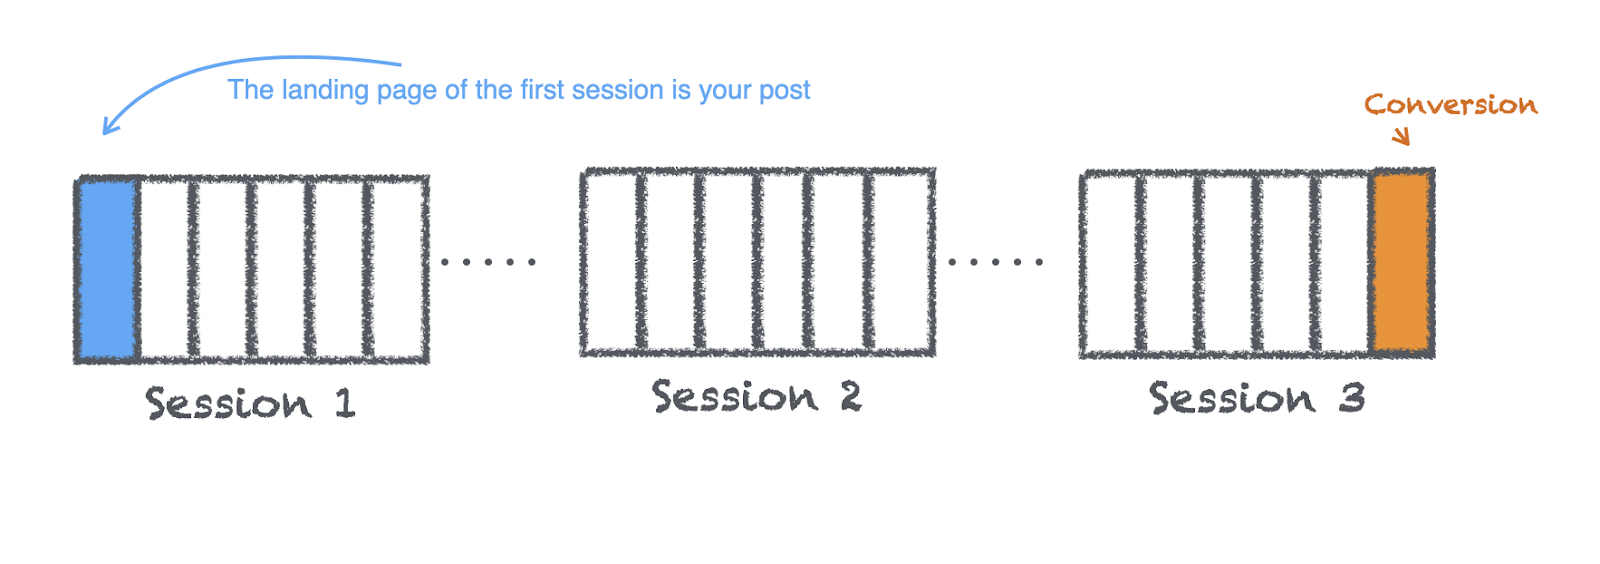 The landing page of the first session is your post vs the conversion.